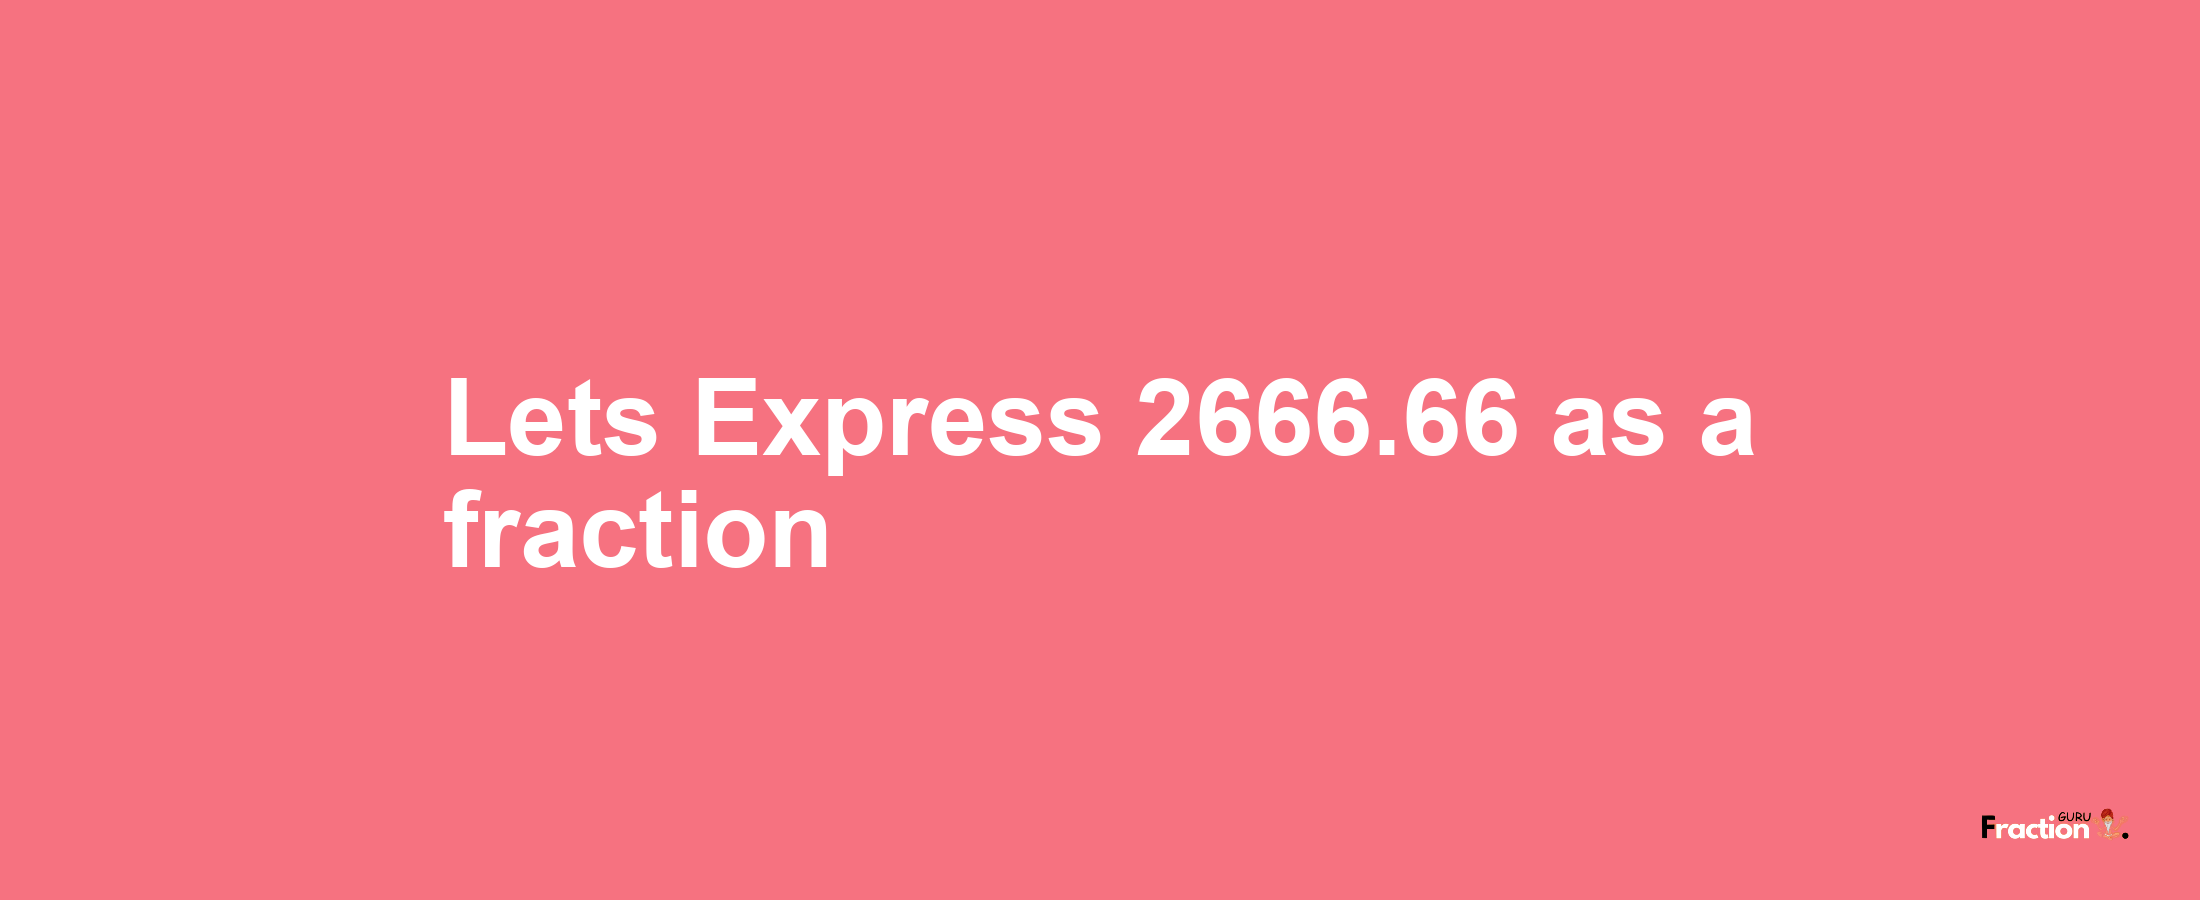 Lets Express 2666.66 as afraction